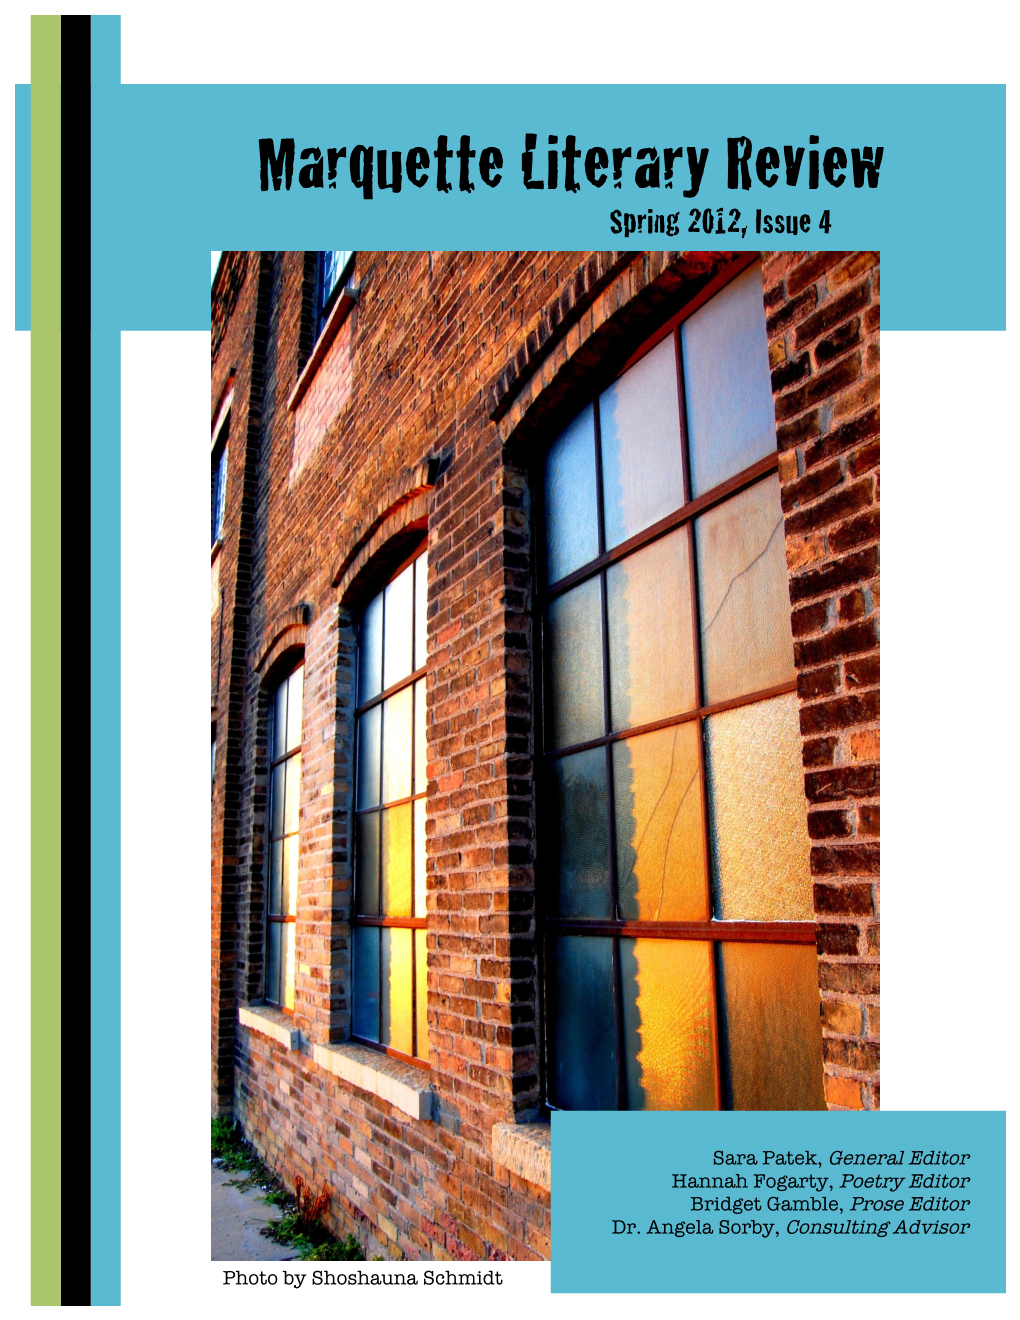 Marquette Literary Review Issue 4, Spring 2012